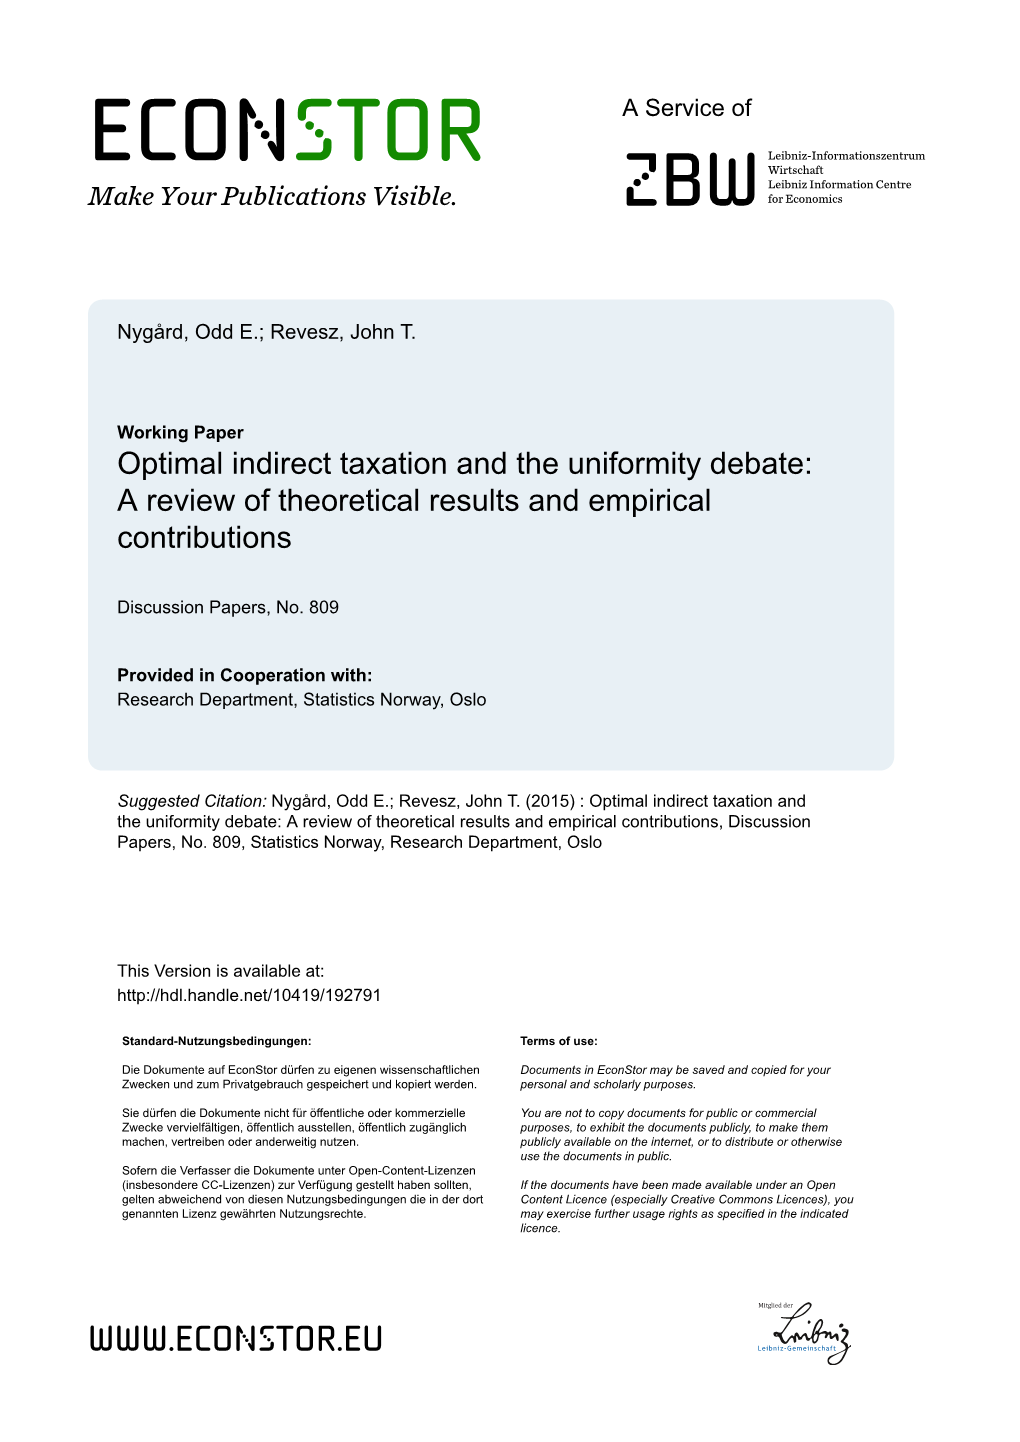 Optimal Indirect Taxation and the Uniformity Debate: a Review of Theoretical Results and Empirical Contributions